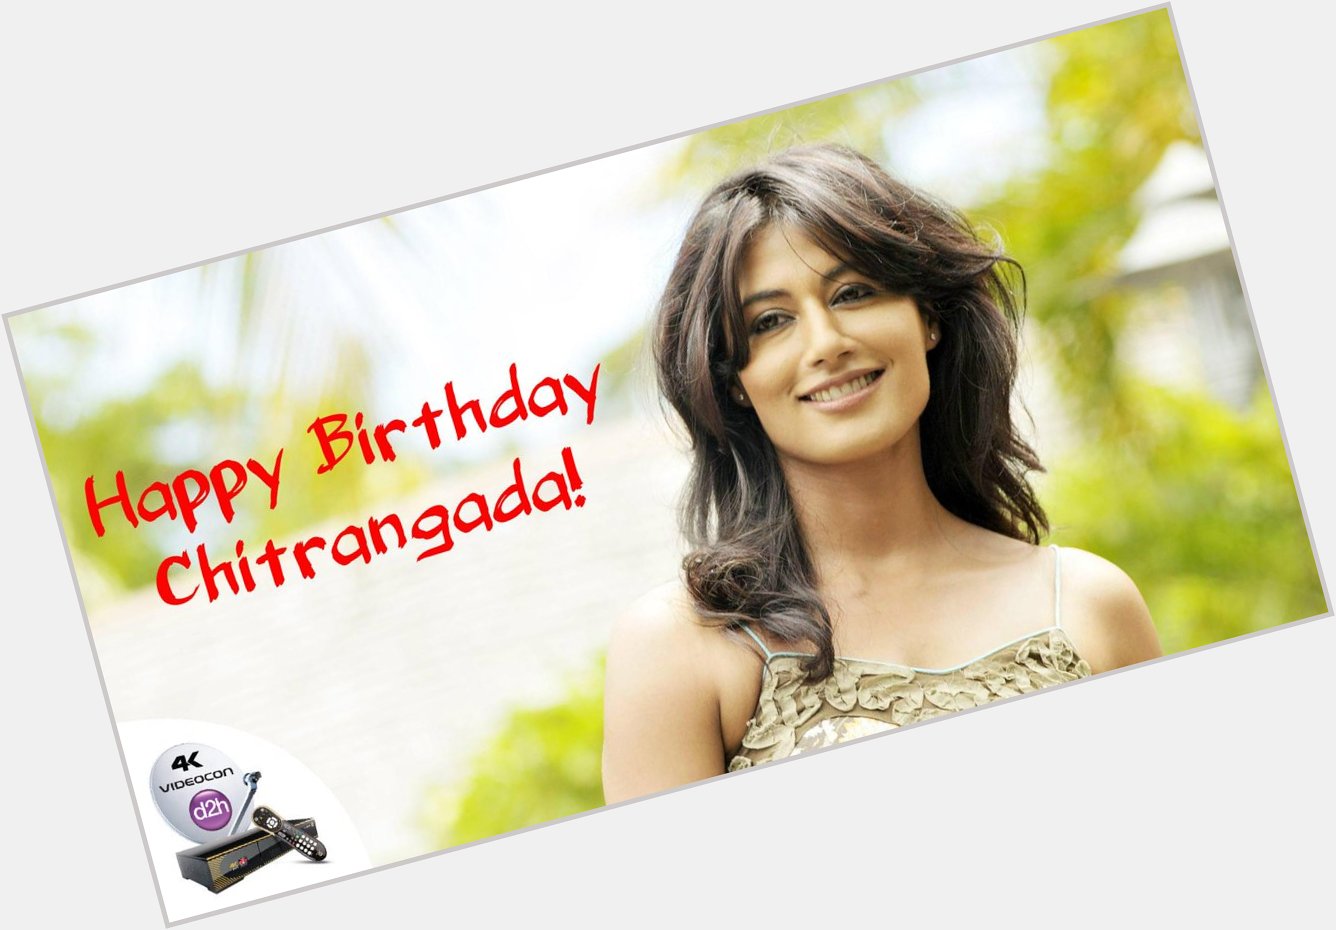 Happy Birthday Chitrangada Singh!
Join us in wishing the talented actress a wonderful year ahead. 